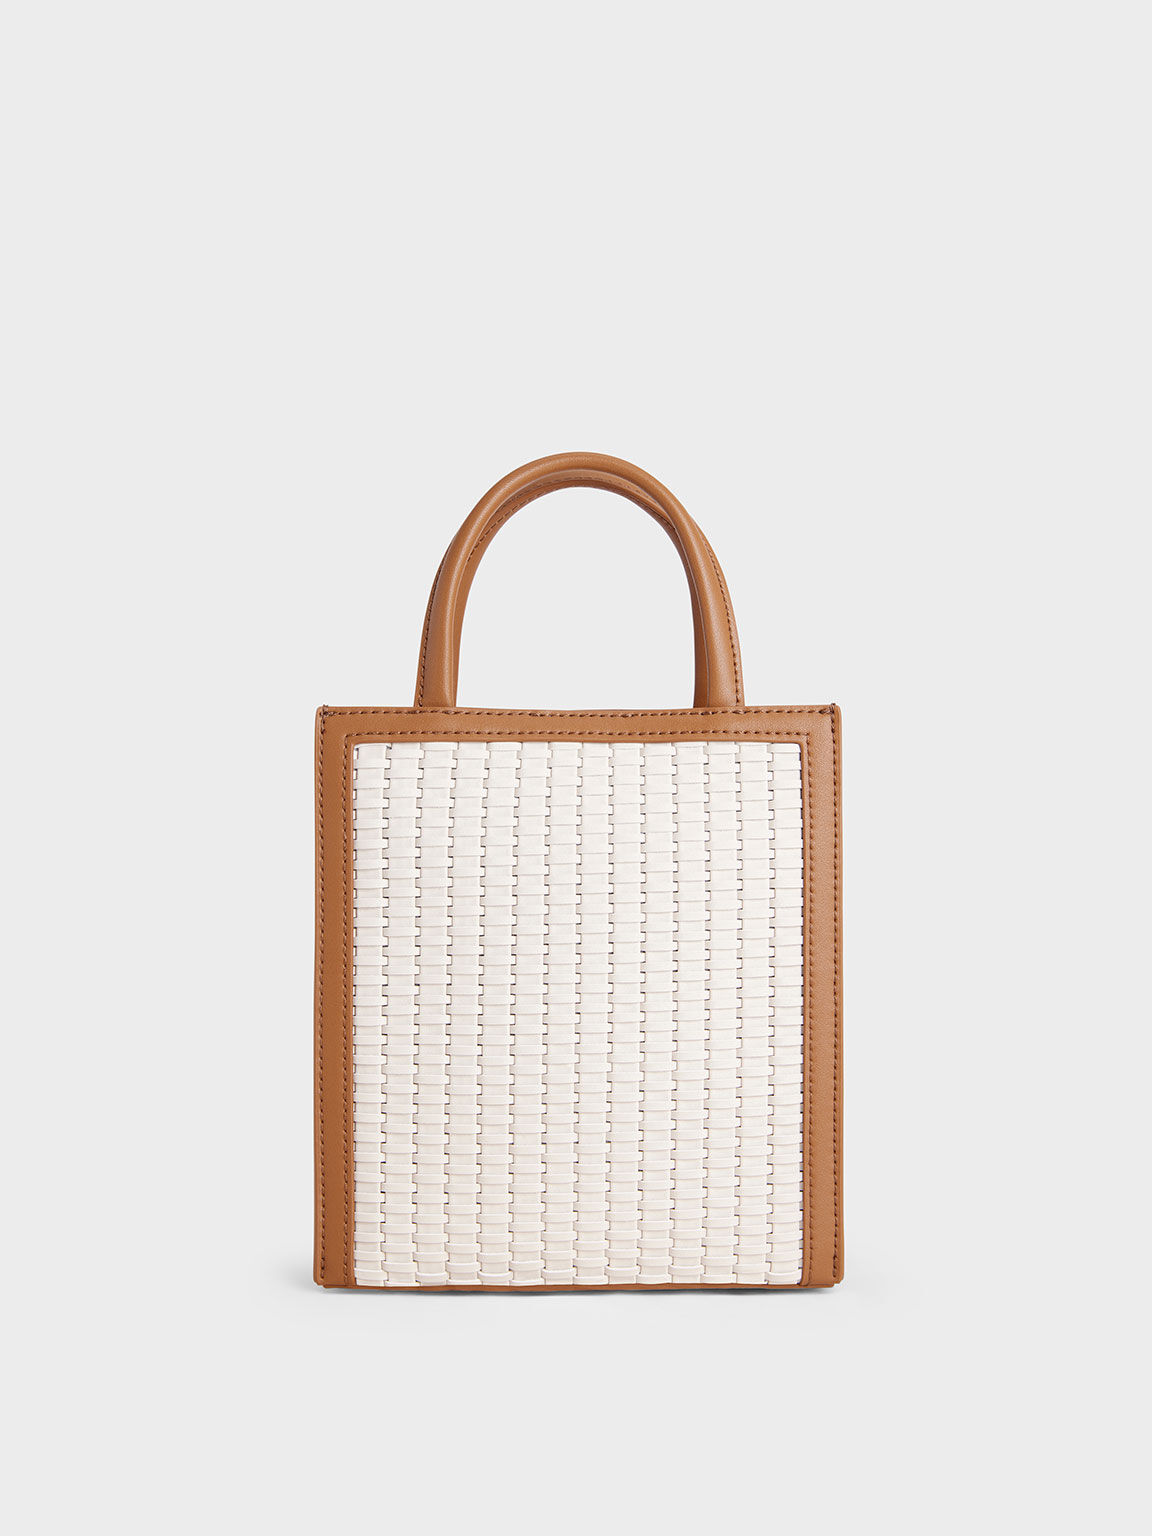 Woven Double Handle Tote Bag, Chocolate, hi-res